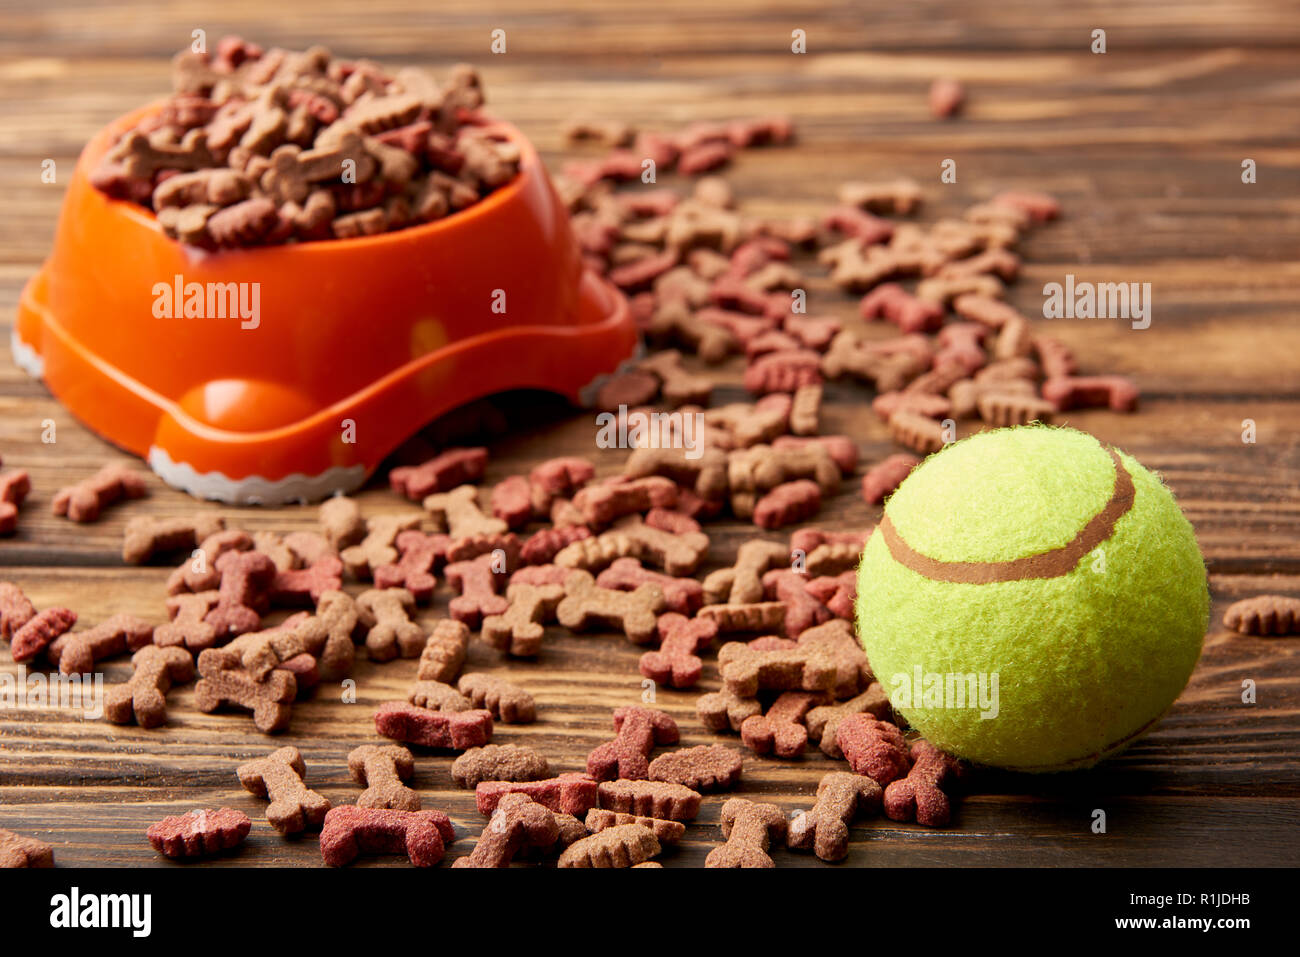 selective focus of plastic bowl with dog food and ball on wooden table Stock Photo